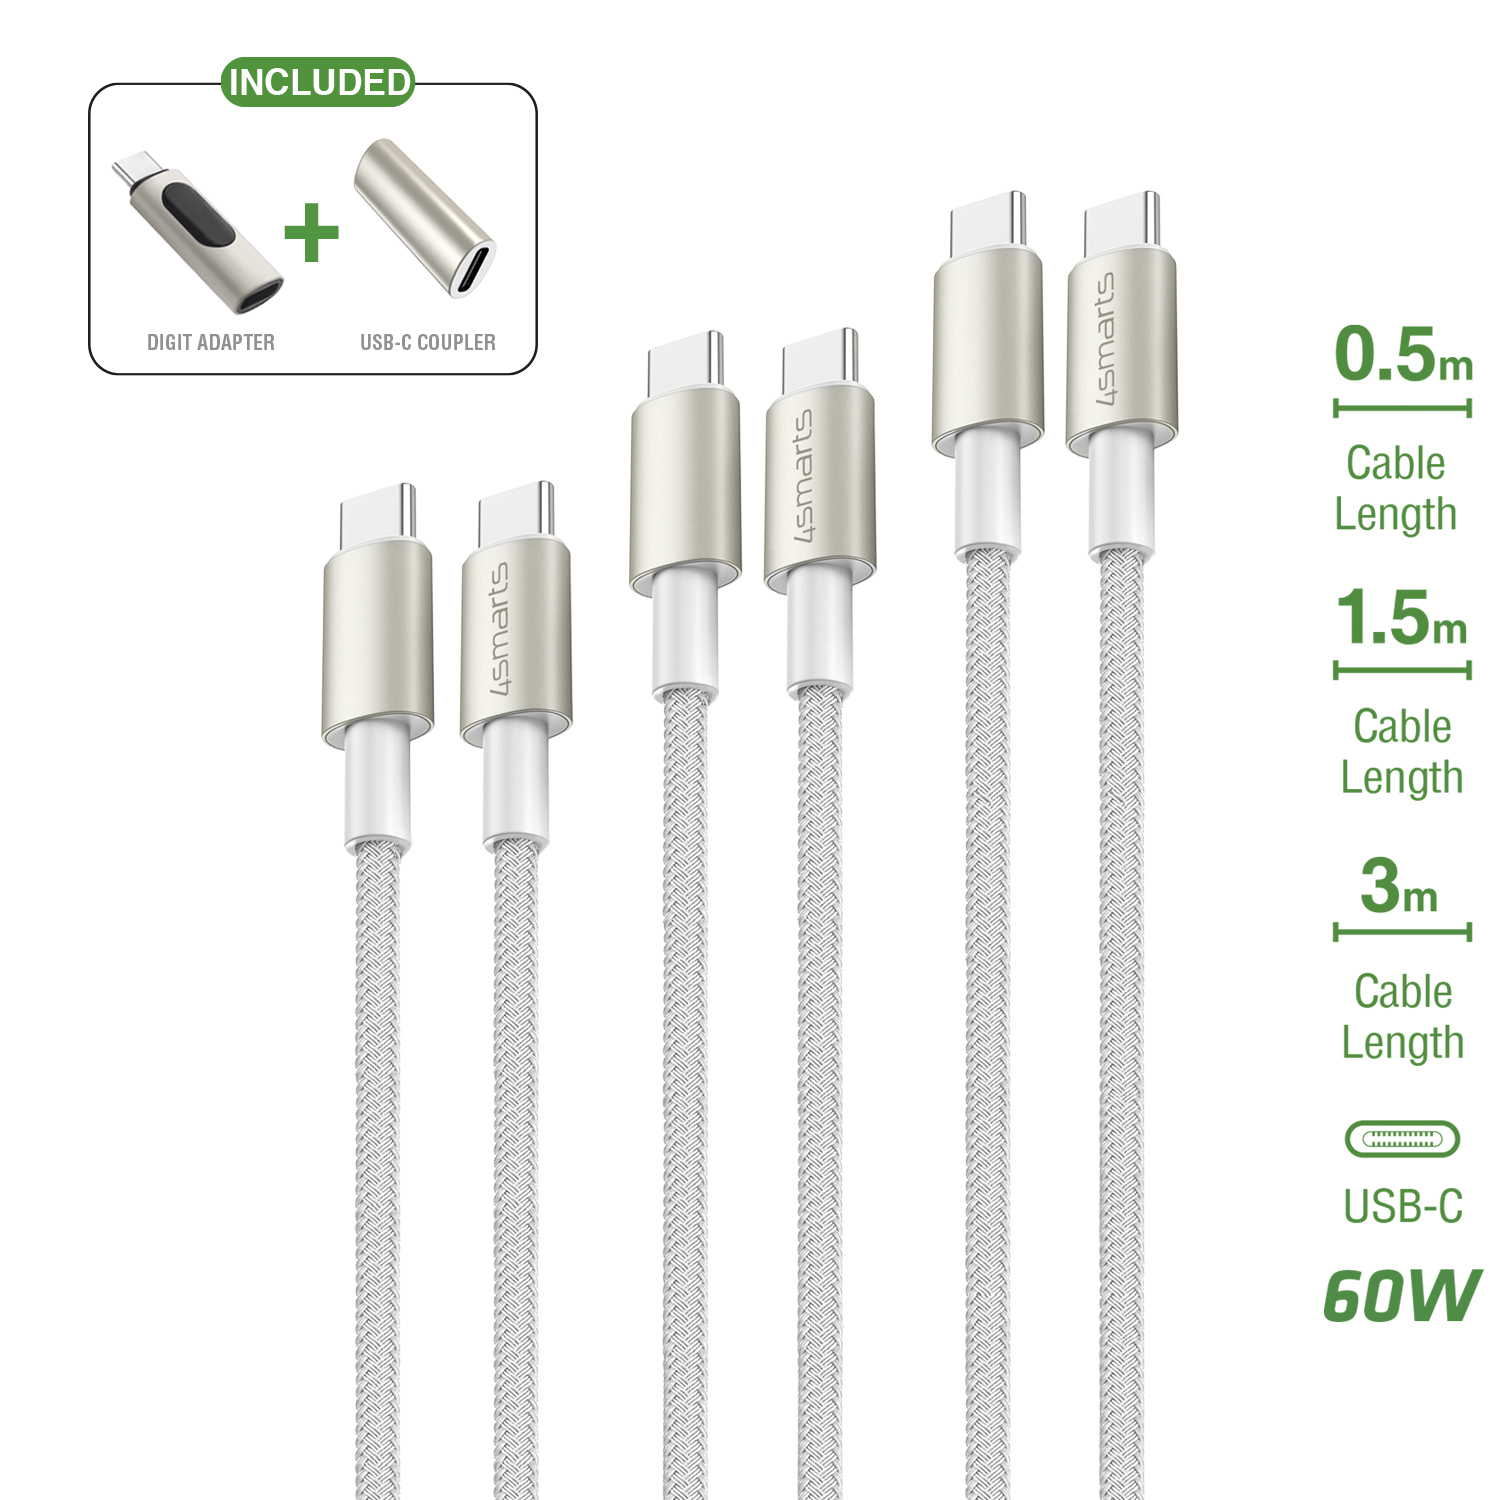 The 4smarts USB-C PremiumCord 60W set is available in 3 lengths.